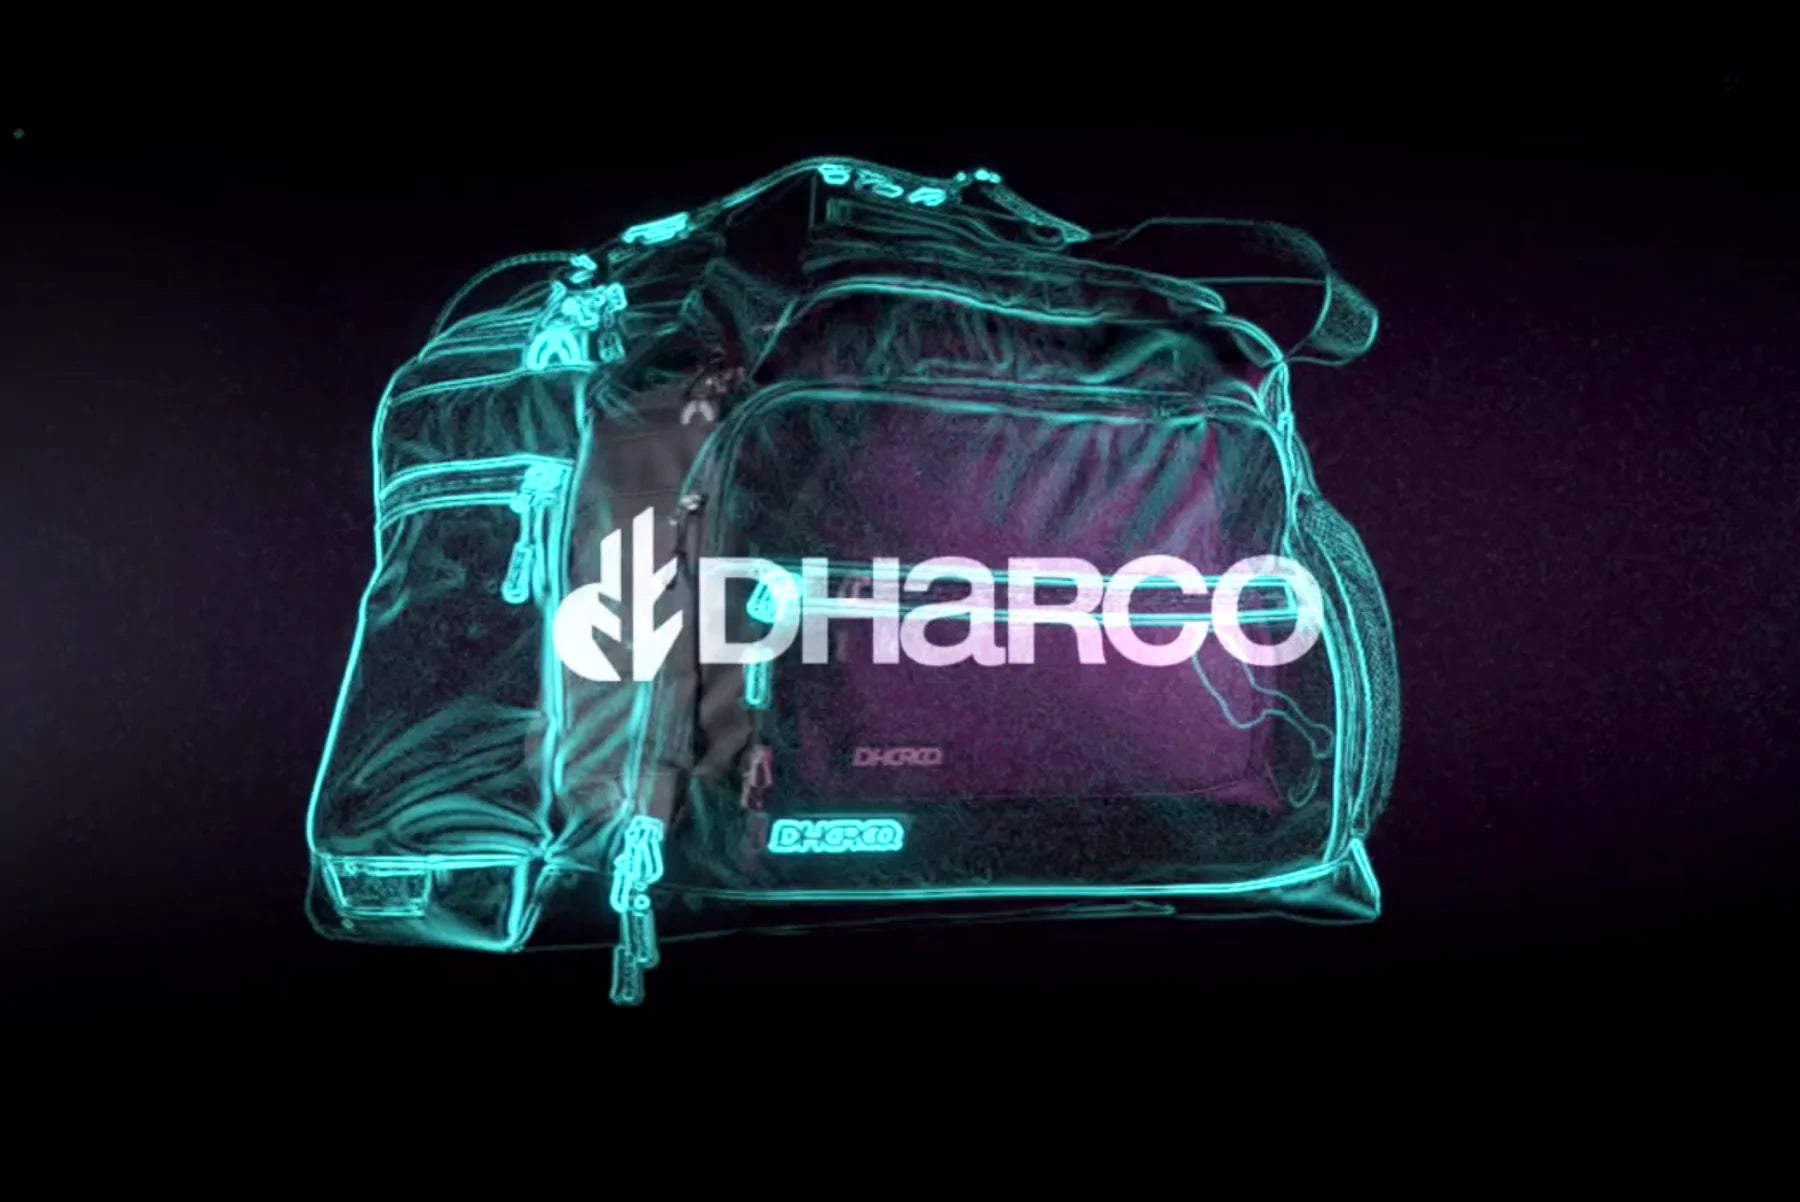 Introducing The DHaRCO Duffle Bag + Custom Straps